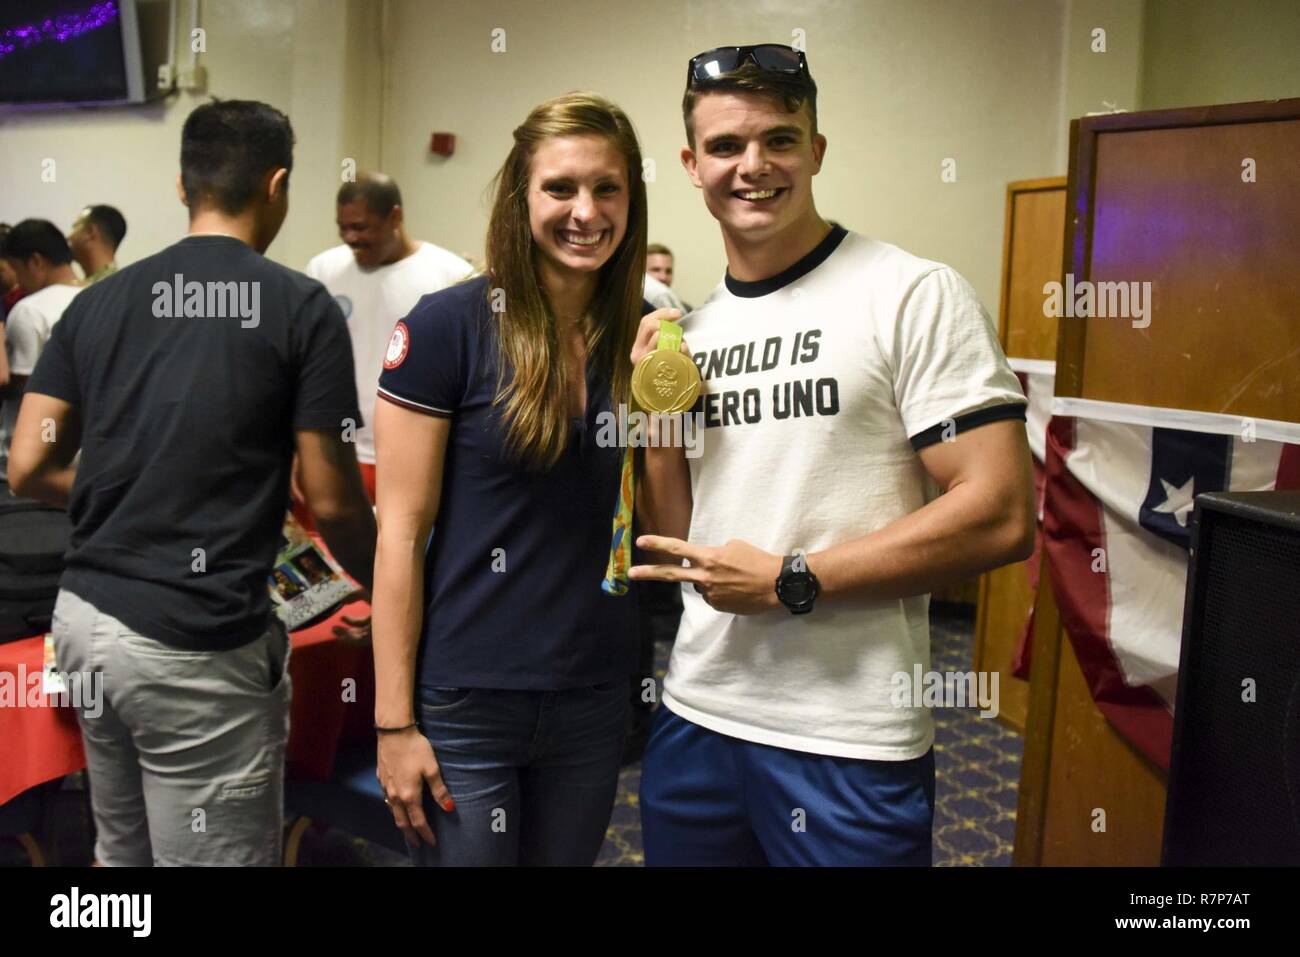 DIEGO GARCIA, British Indian Ocean Territory (Mar. 28, 2016) – Olympic gold medalist Katie Meili shows off her gold medal with Hospital Corpsman 3rd Class Anthony Sgroia during a meet and greet after an USO show. U.S. Navy Support Facility Diego Garcia provides logistic, service, recreational and administrative support to U.S. and Allied Forces forward deployed to the Indian Ocean and Arabian Gulf. Stock Photo